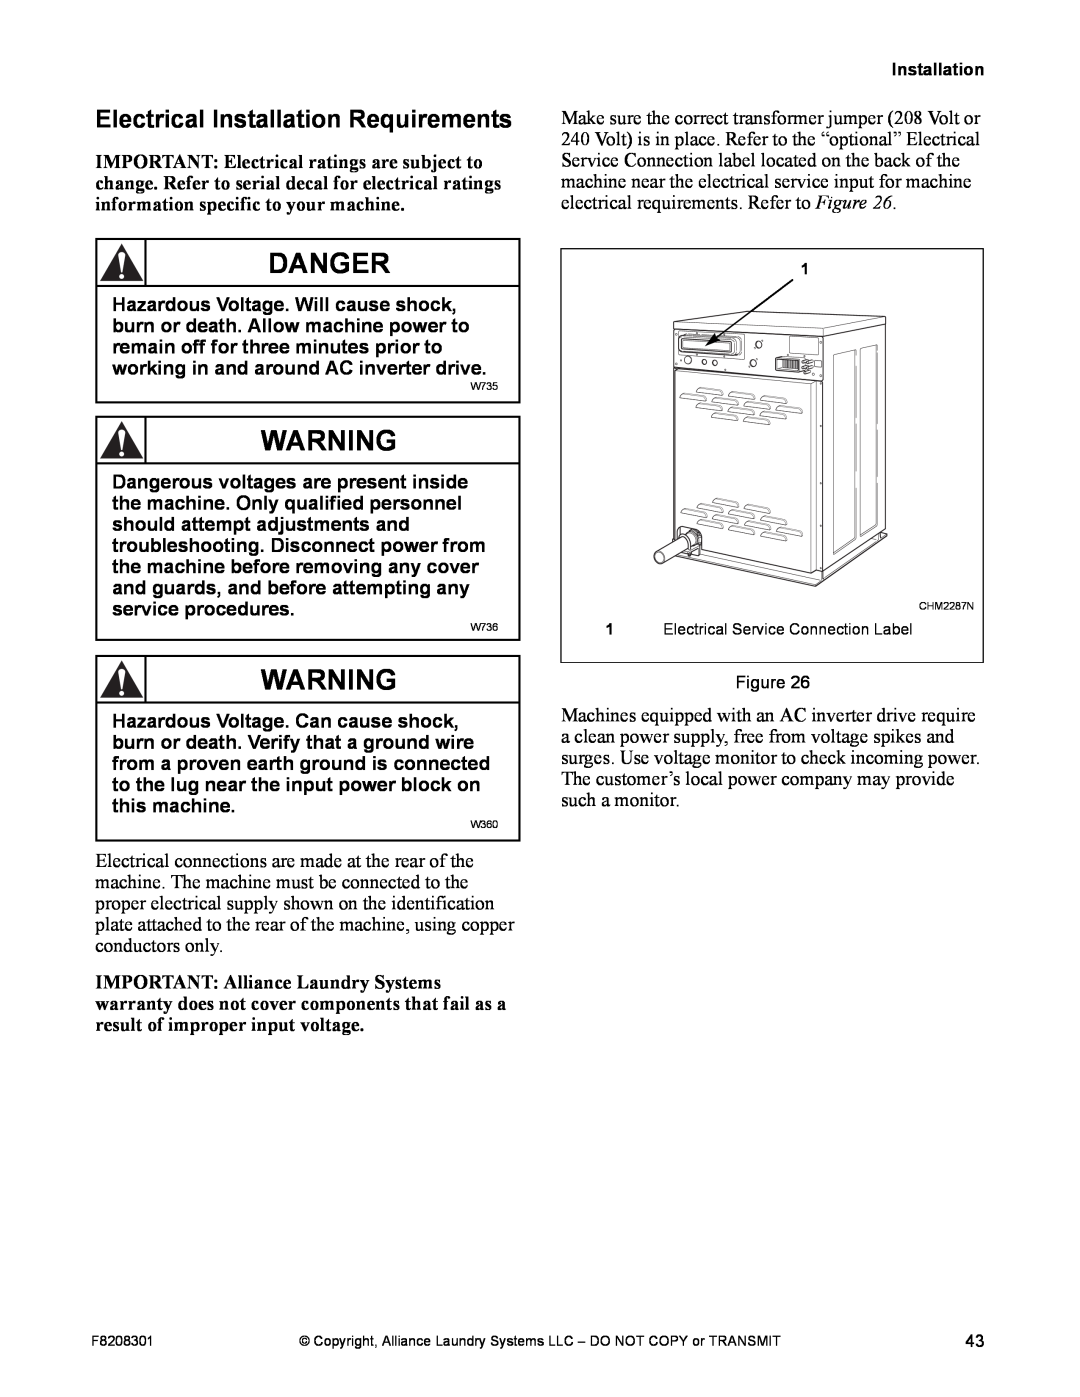 Alliance Laundry Systems CHM1772C manual Electrical Installation Requirements, Danger, Electrical Service Connection Label 